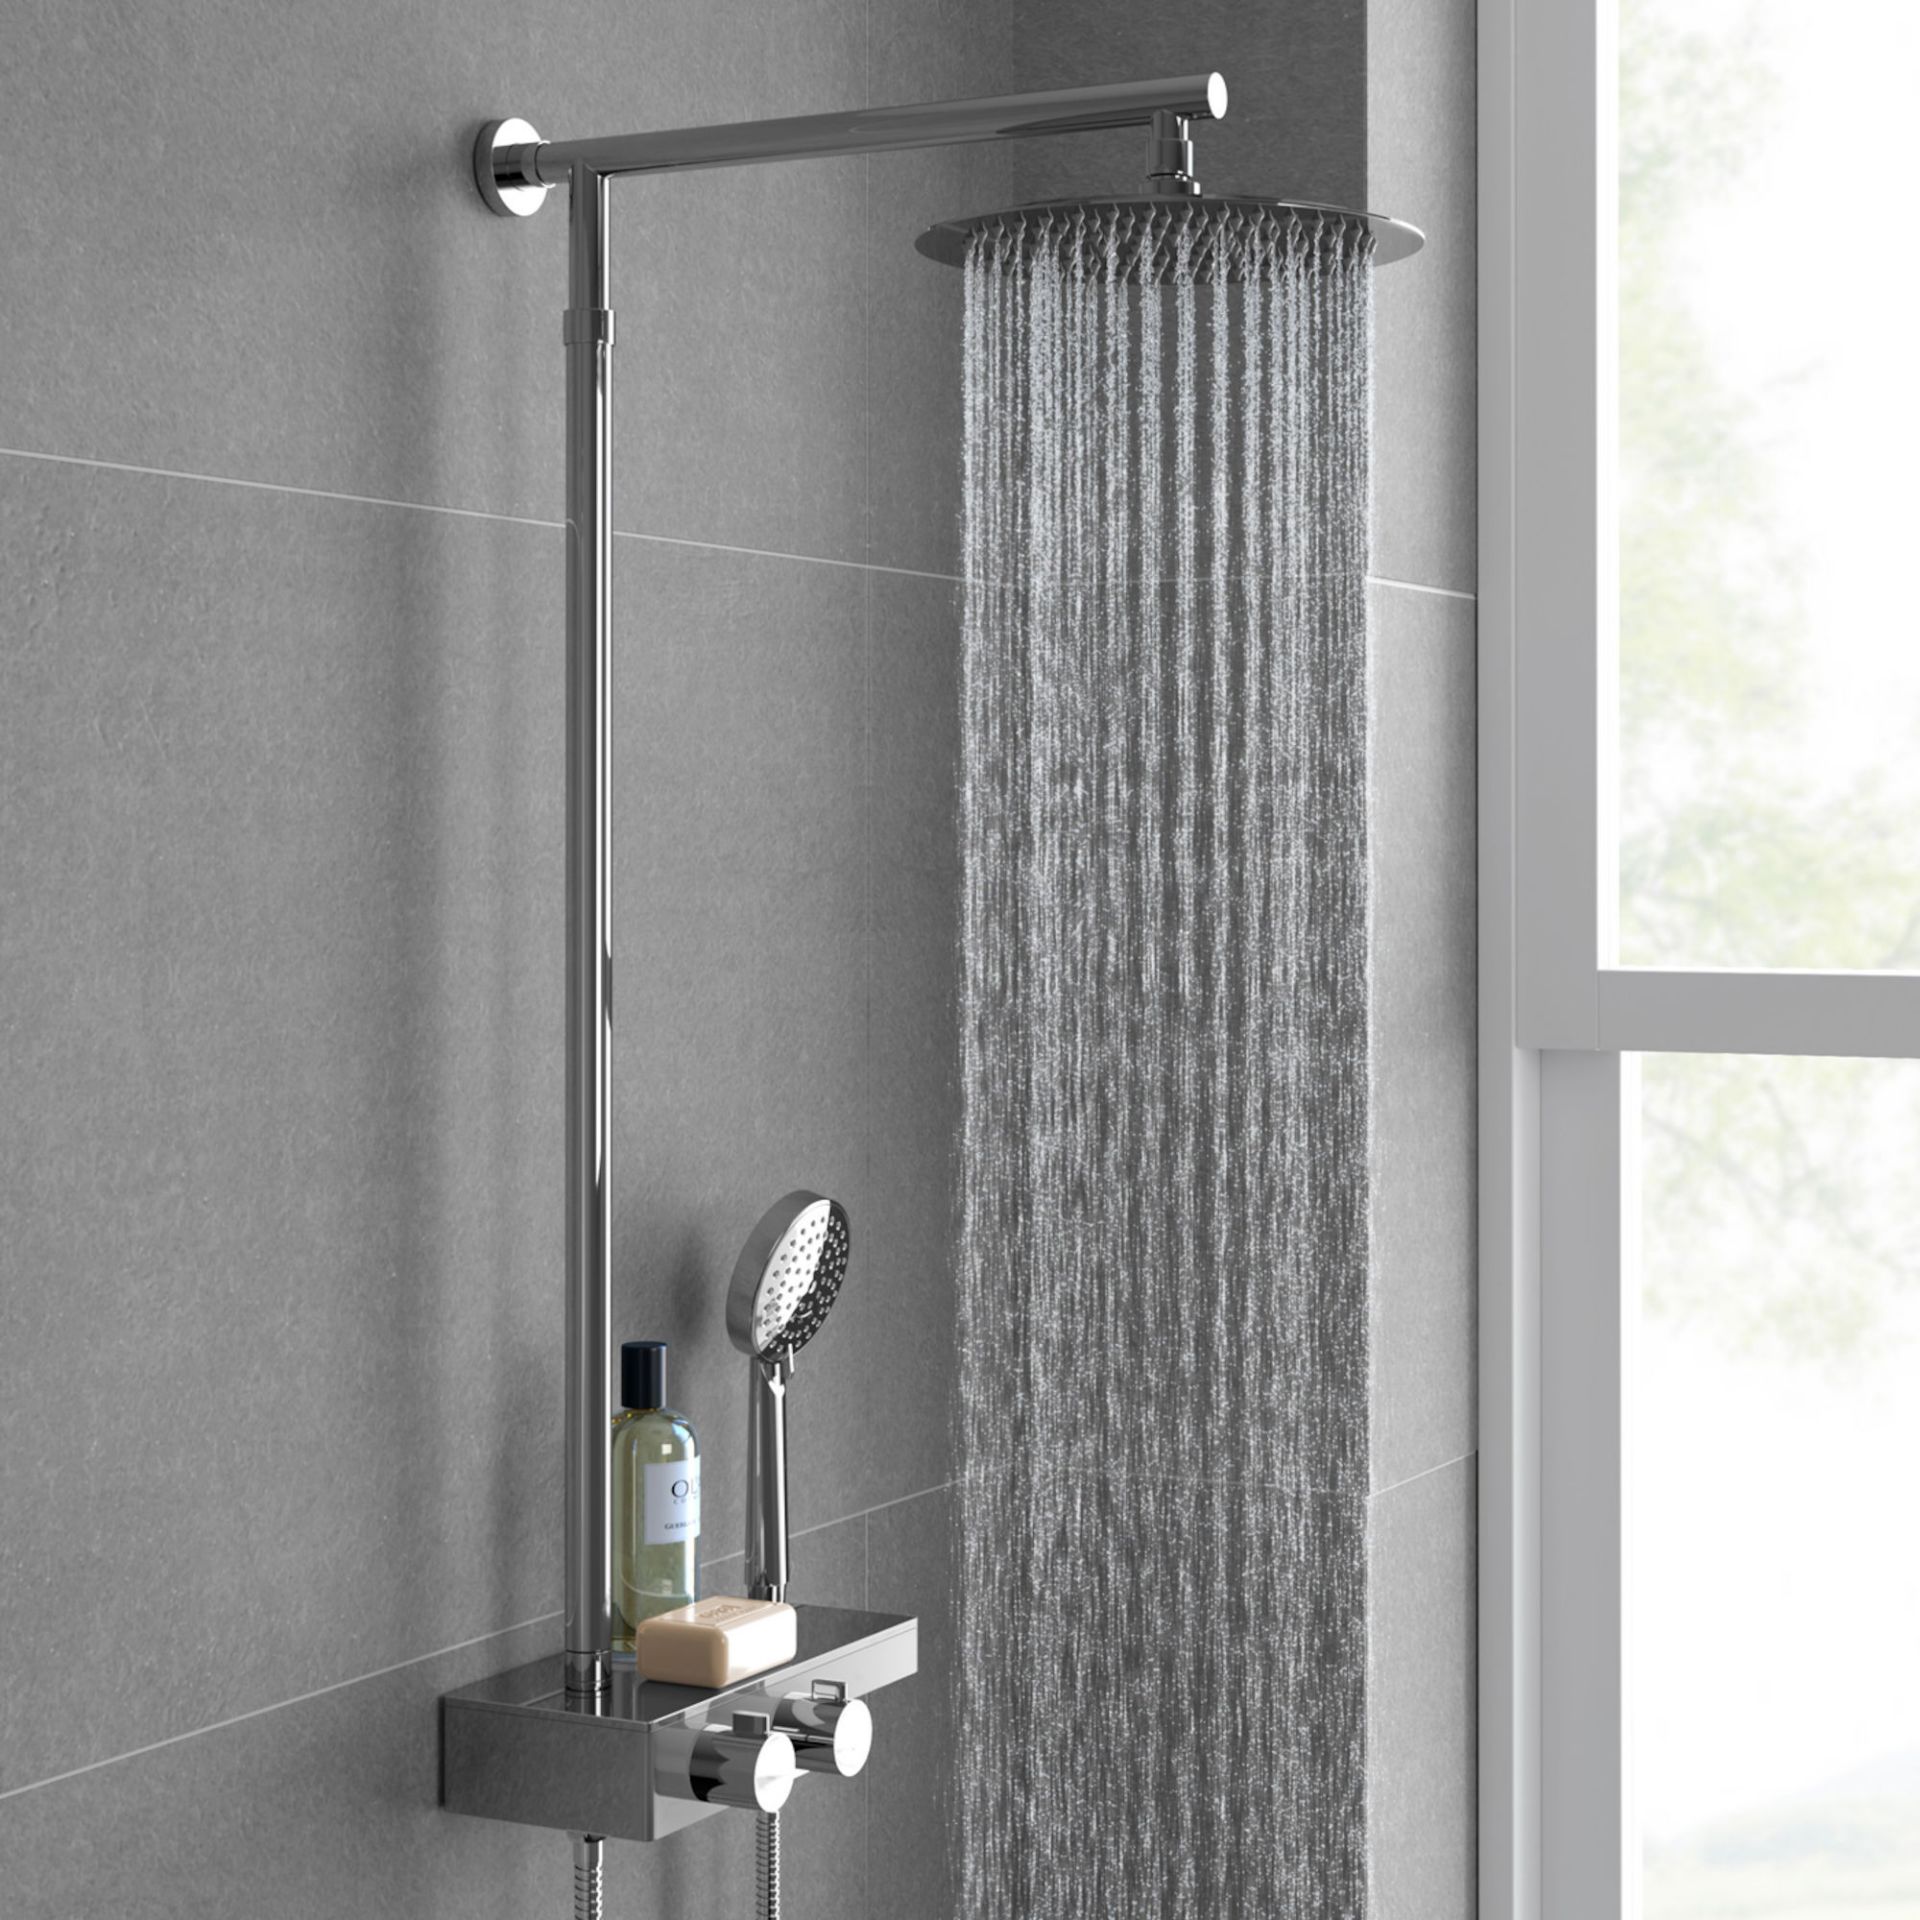 (YC30) Round Exposed Thermostatic Mixer Shower Kit & Large Head. Cool to touch shower for additional